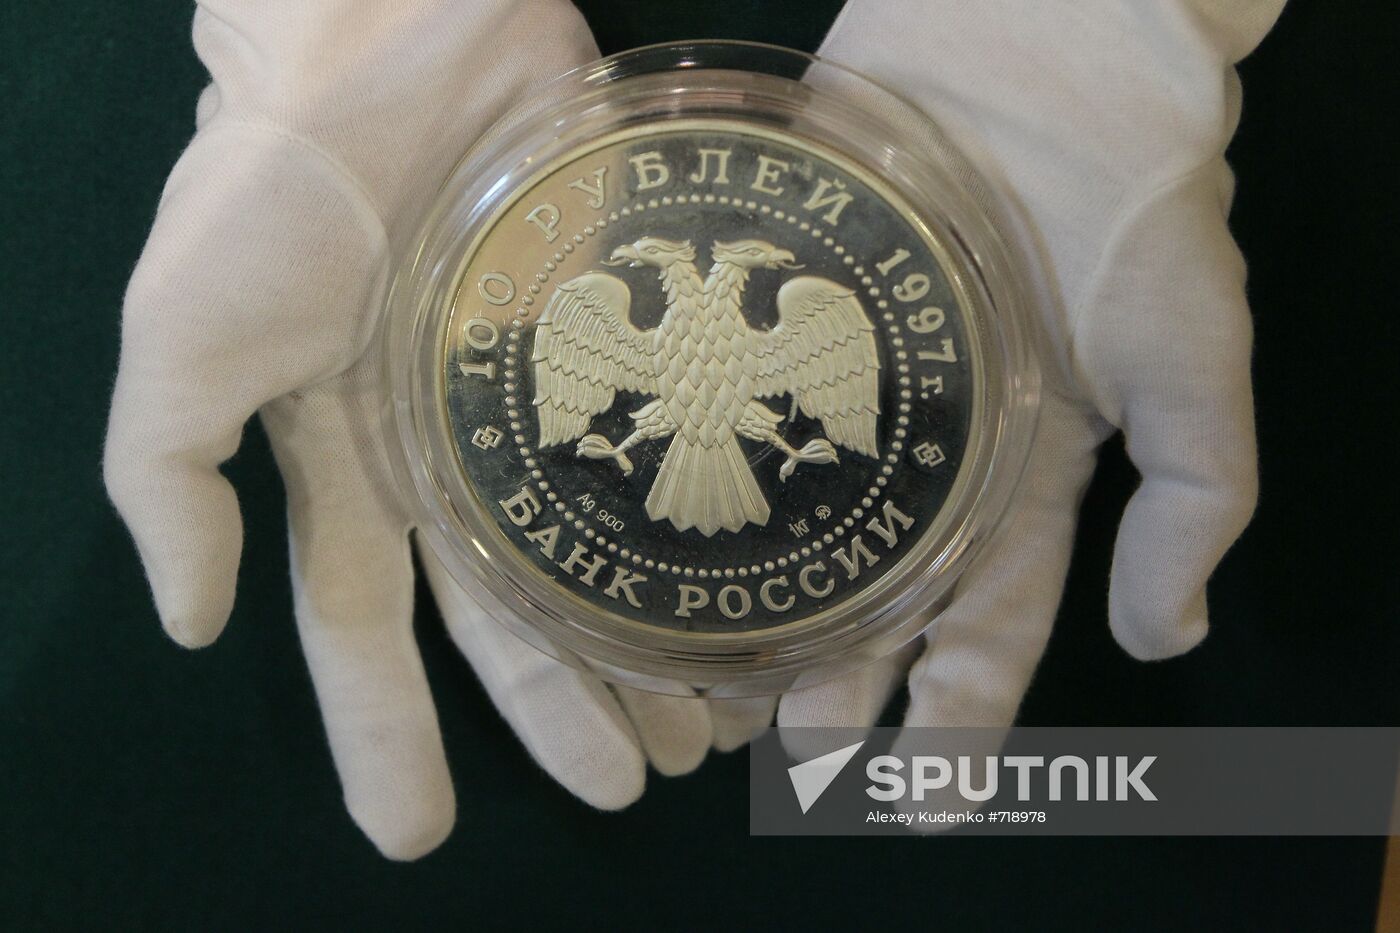 Commemorative coin of Russian Central Bank